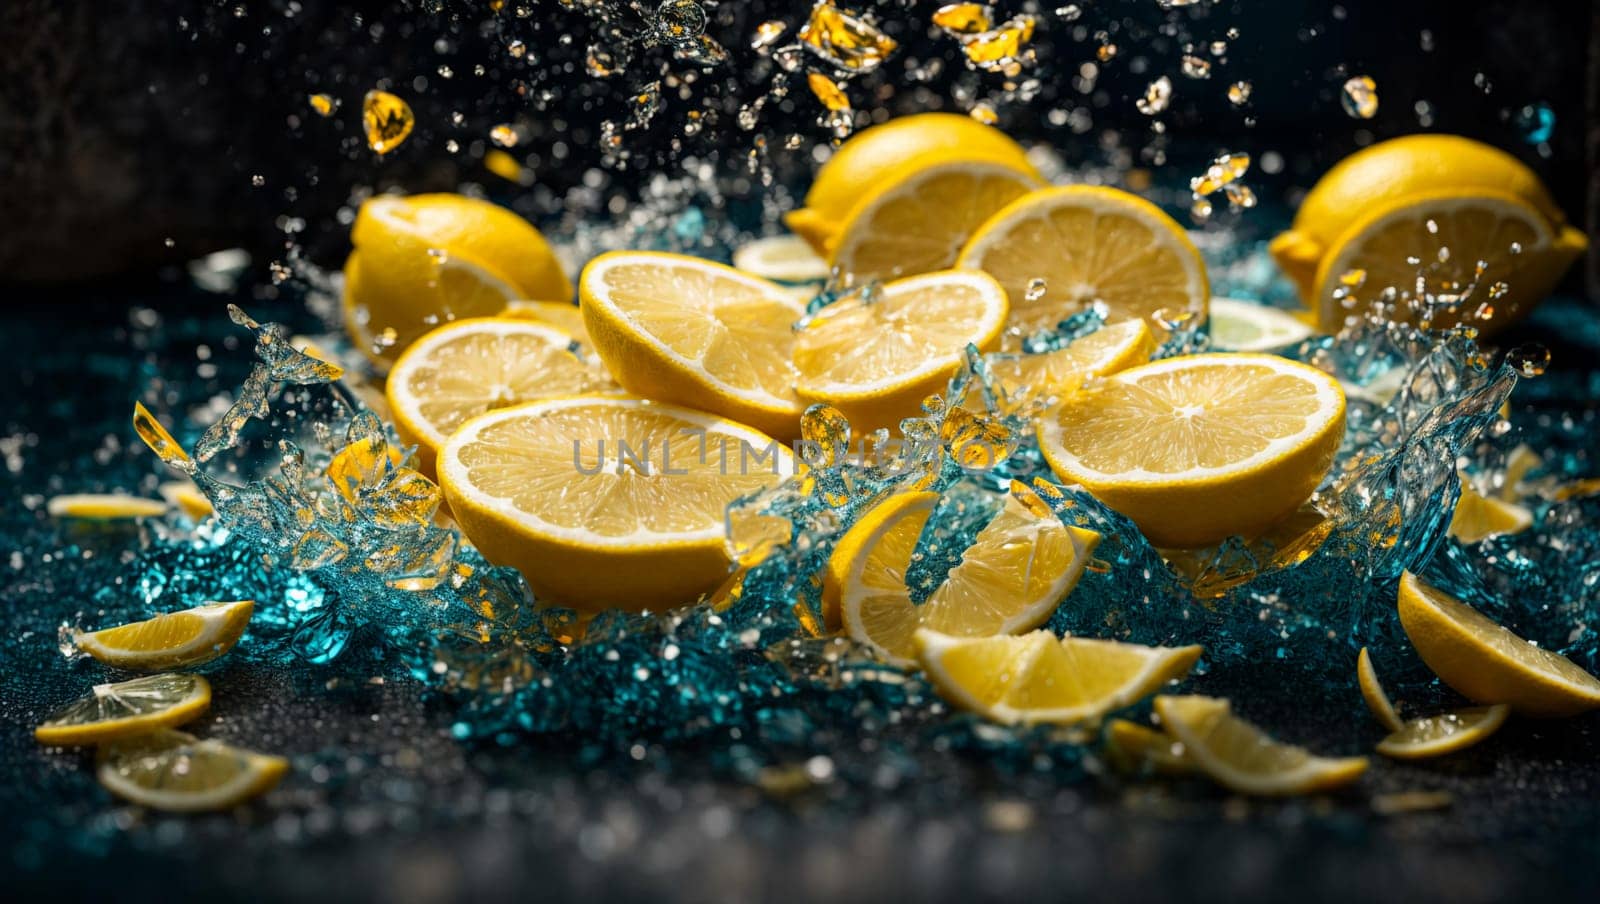 lemon slices in the air and water against a background of deep dark blue and bluish shades by Севостьянов